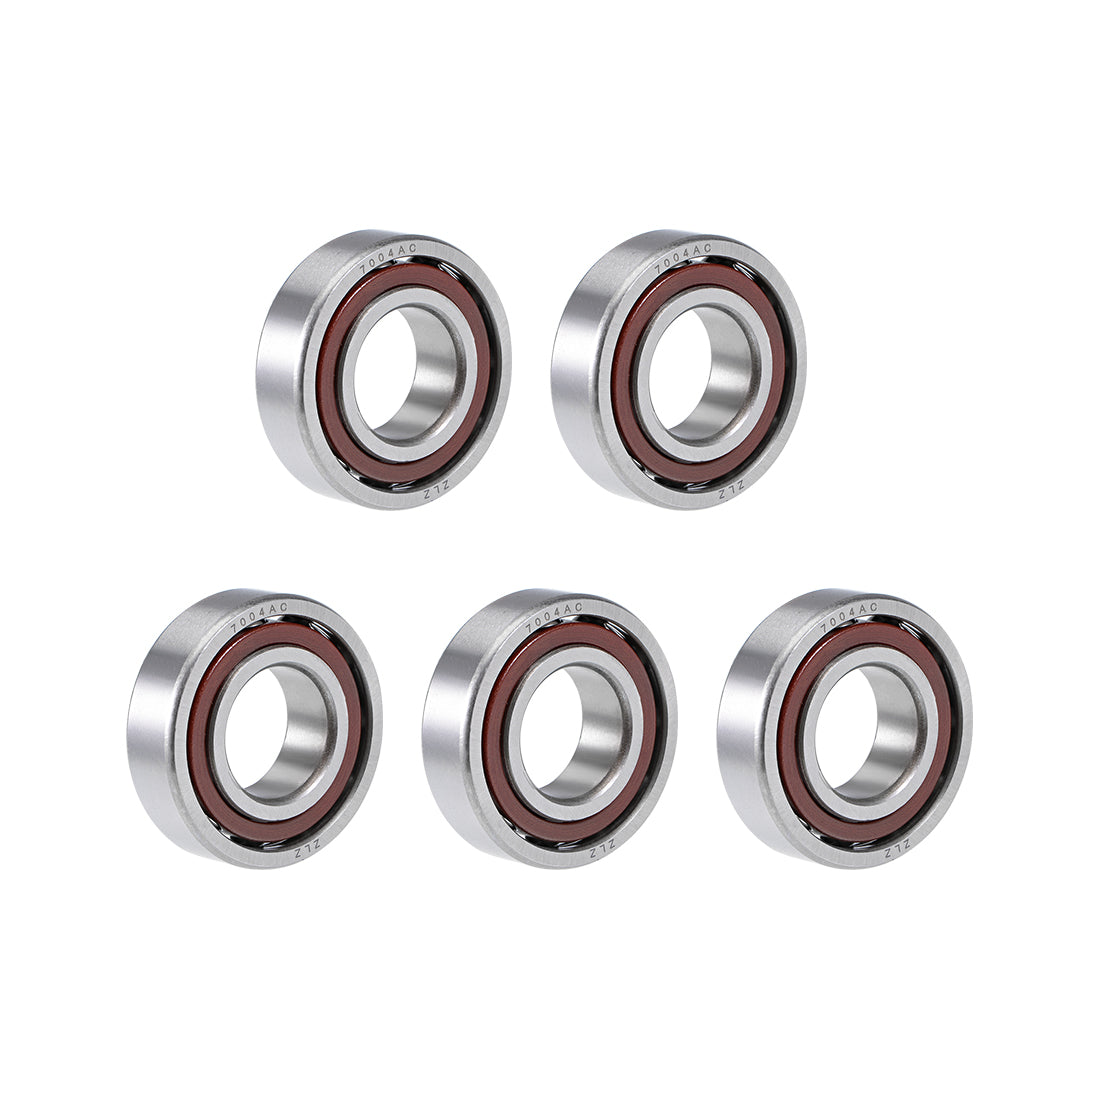 Uxcell Uxcell 7000AC Angular Contact Ball Bearing 10x26x8mm, Single Row, Open, 25° Contact Angle